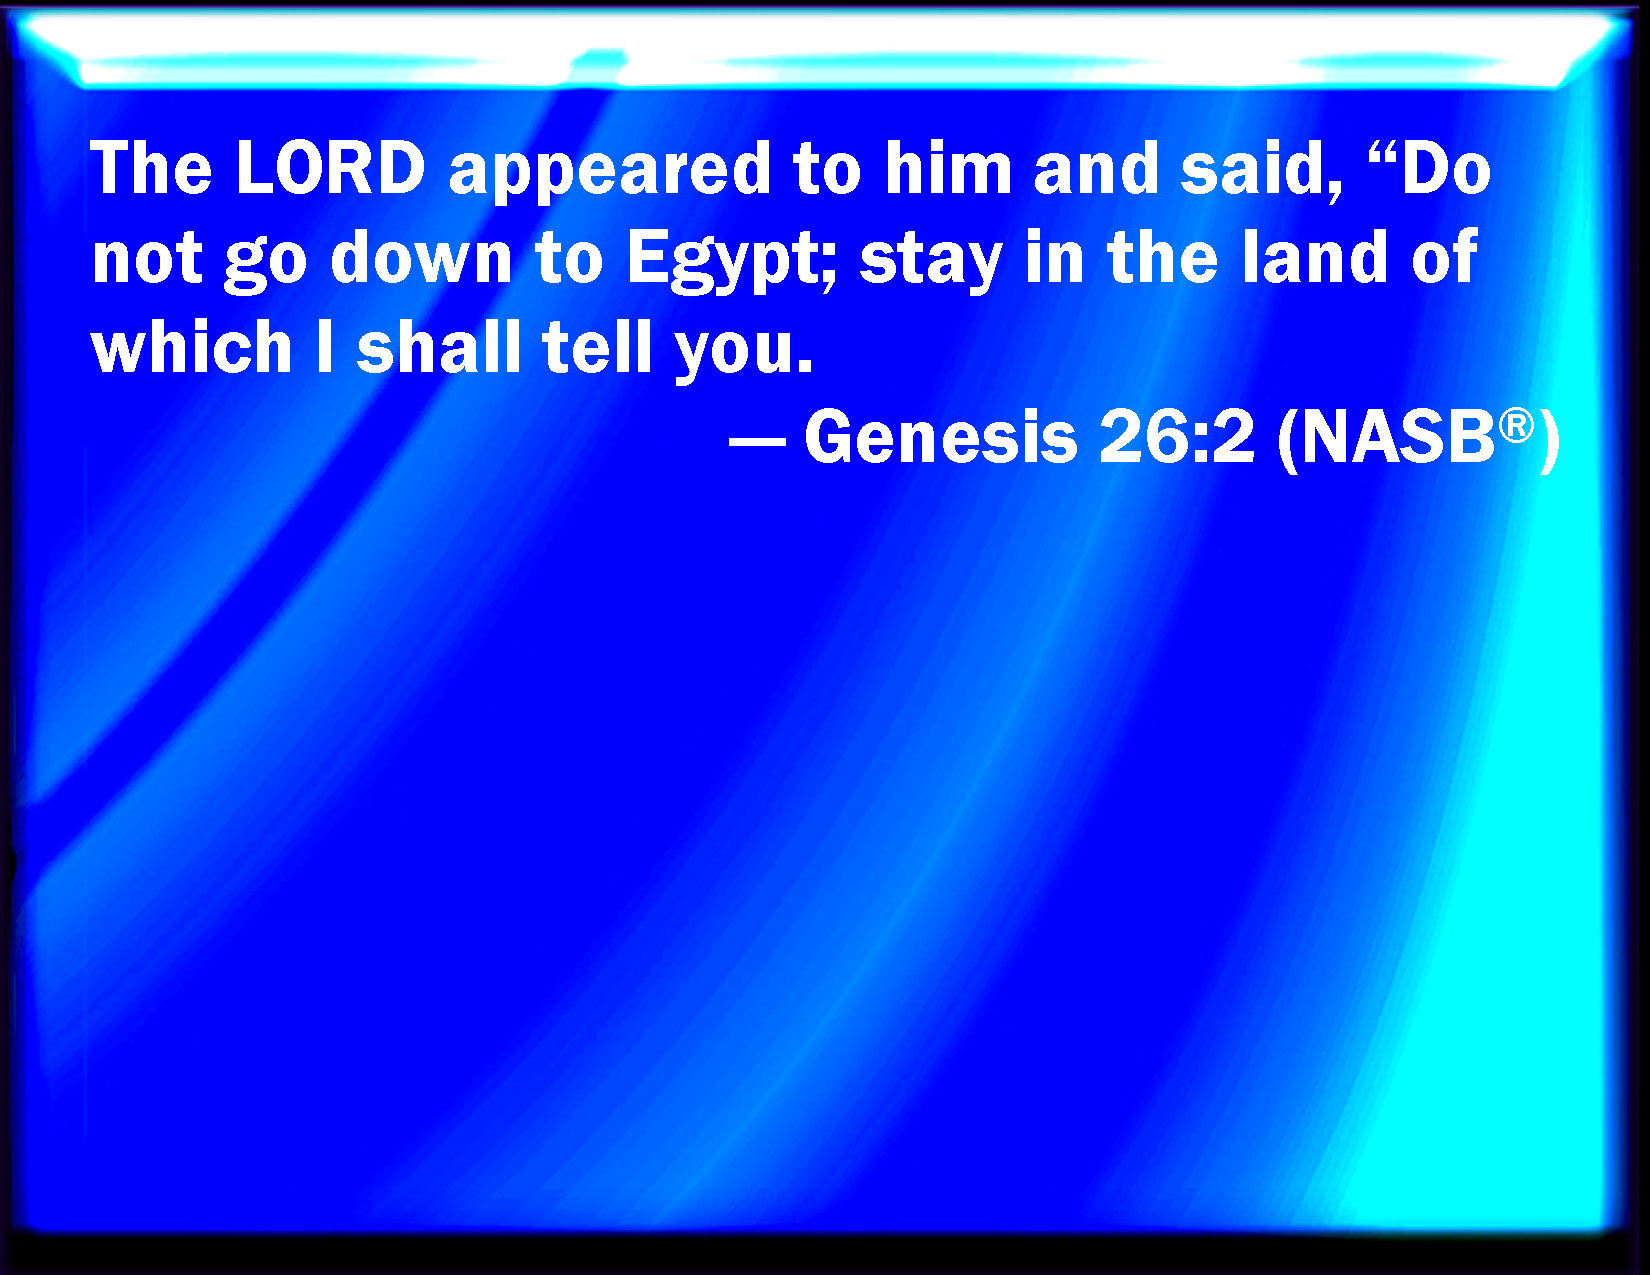 Genesis 26:2 And the LORD appeared to him, and said, Go not down into